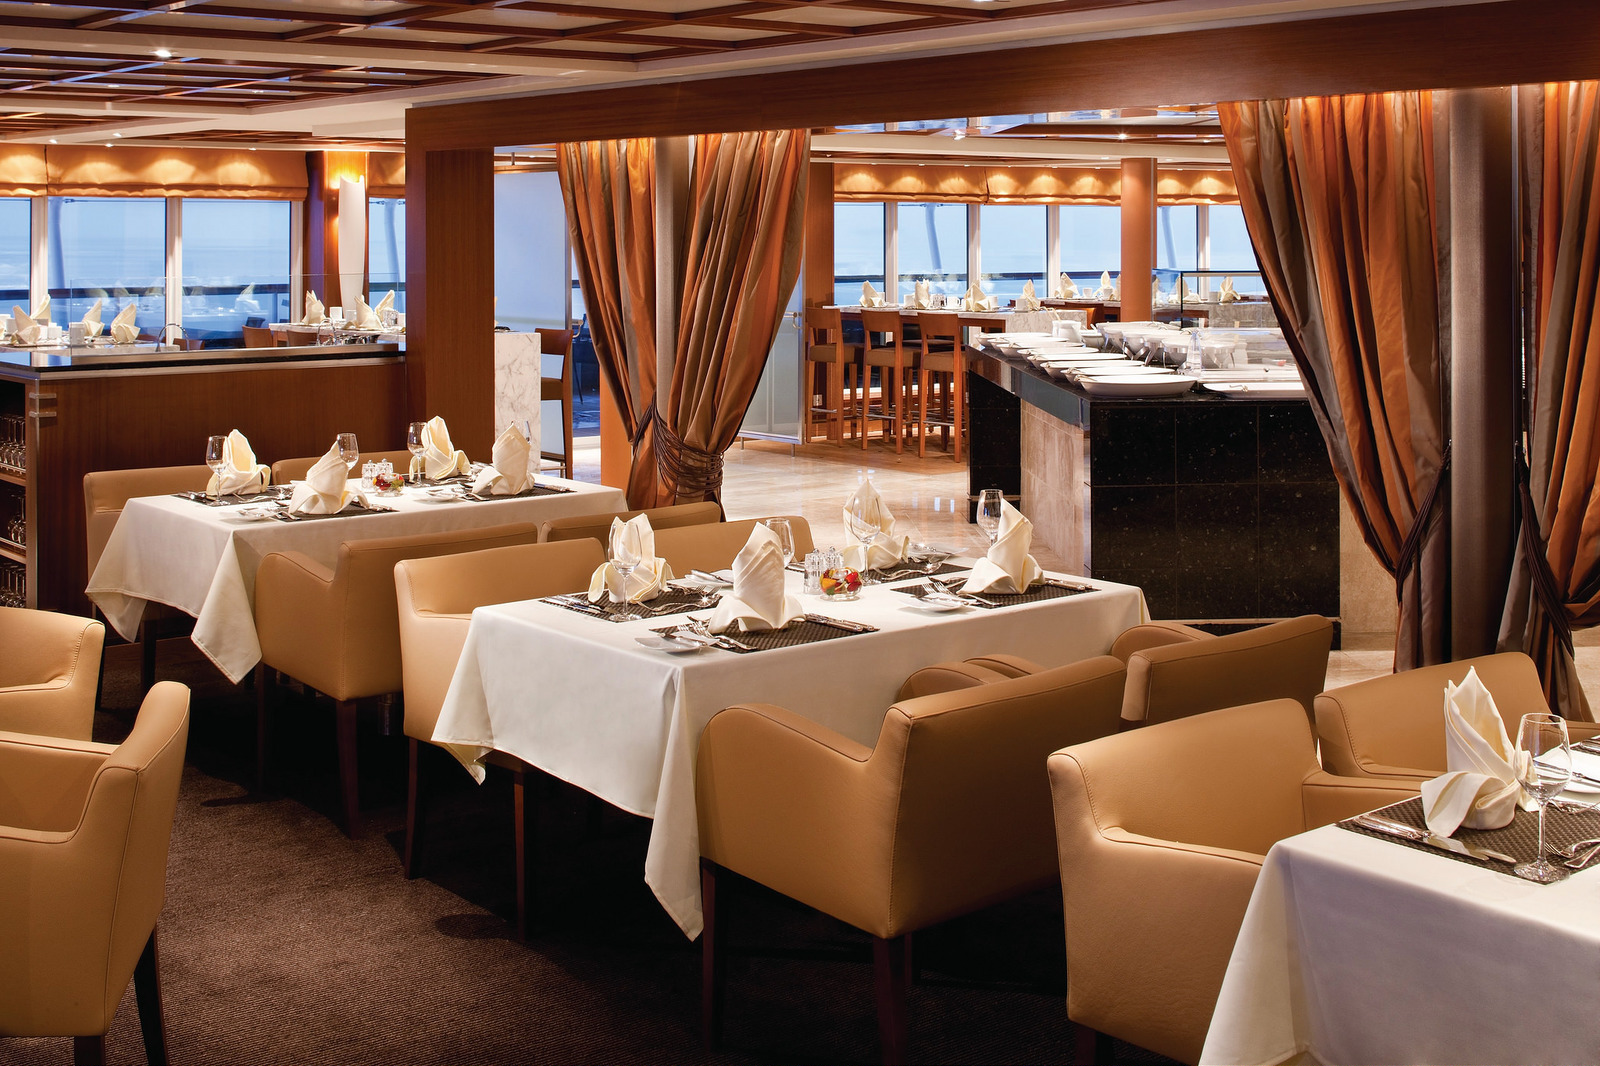 The Colonnade - Seabourn Sojourn